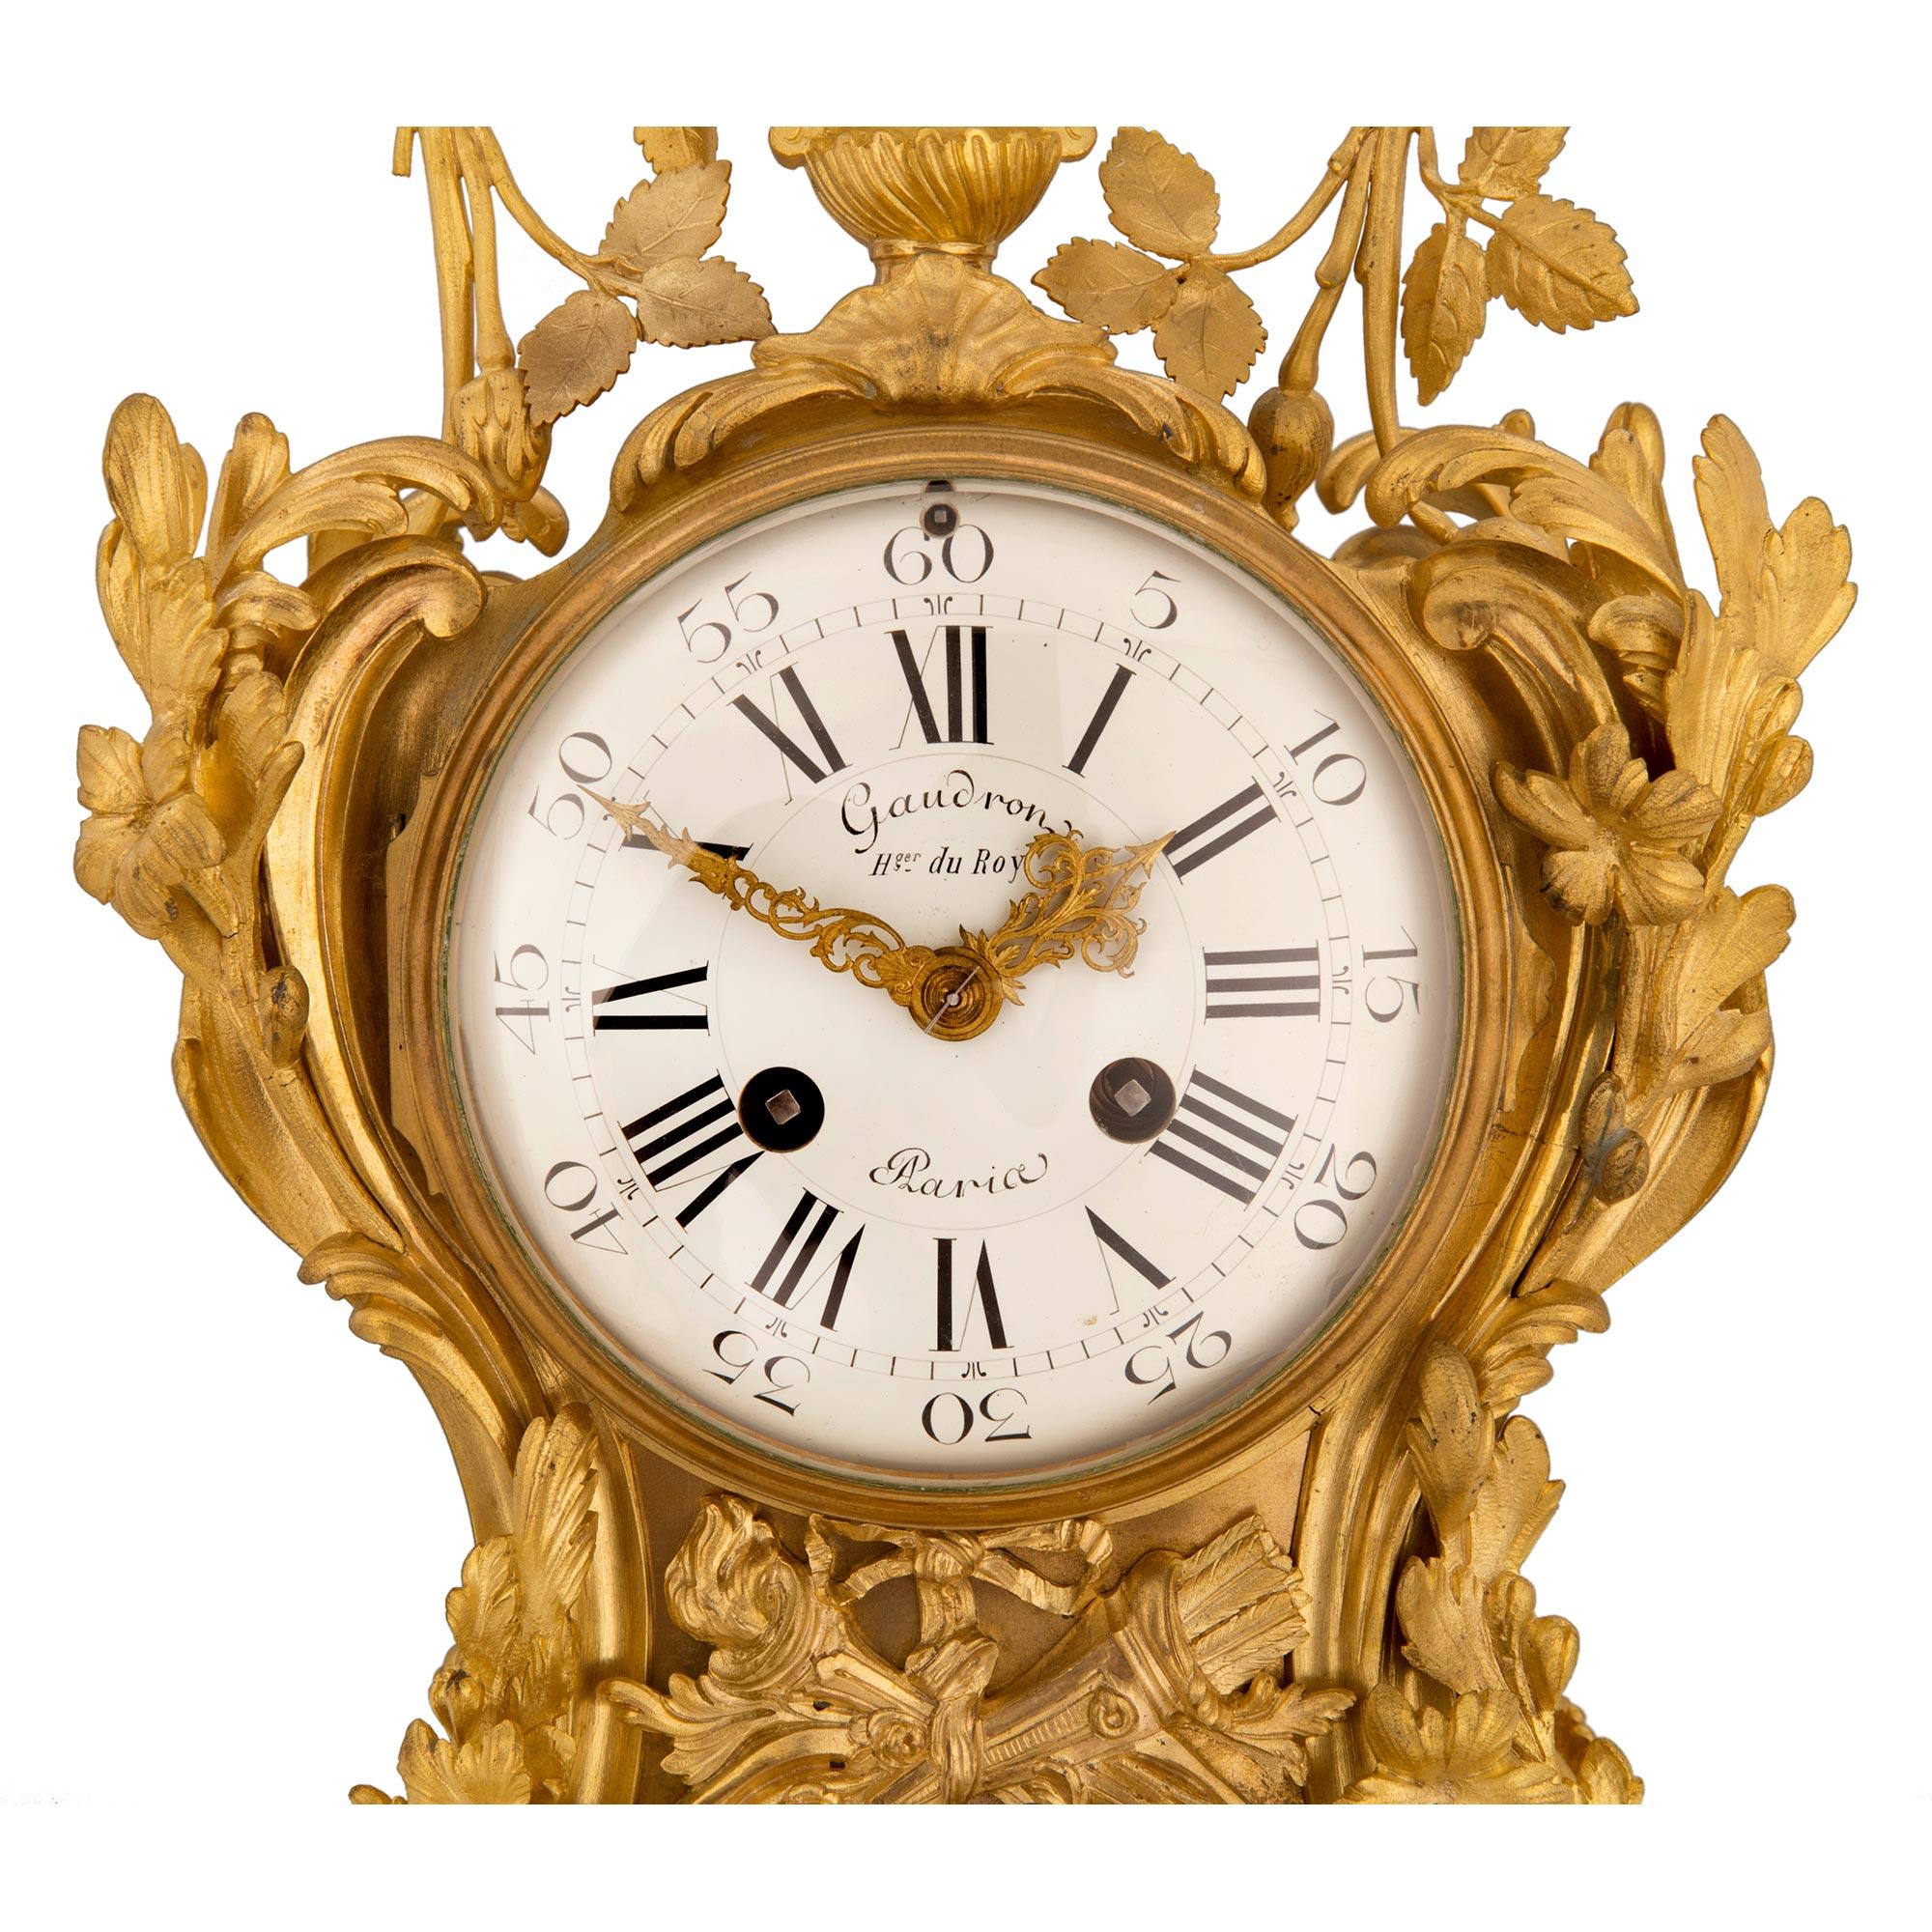 French Early 18th Century Louis XV Period Ormolu Clock In Good Condition For Sale In West Palm Beach, FL